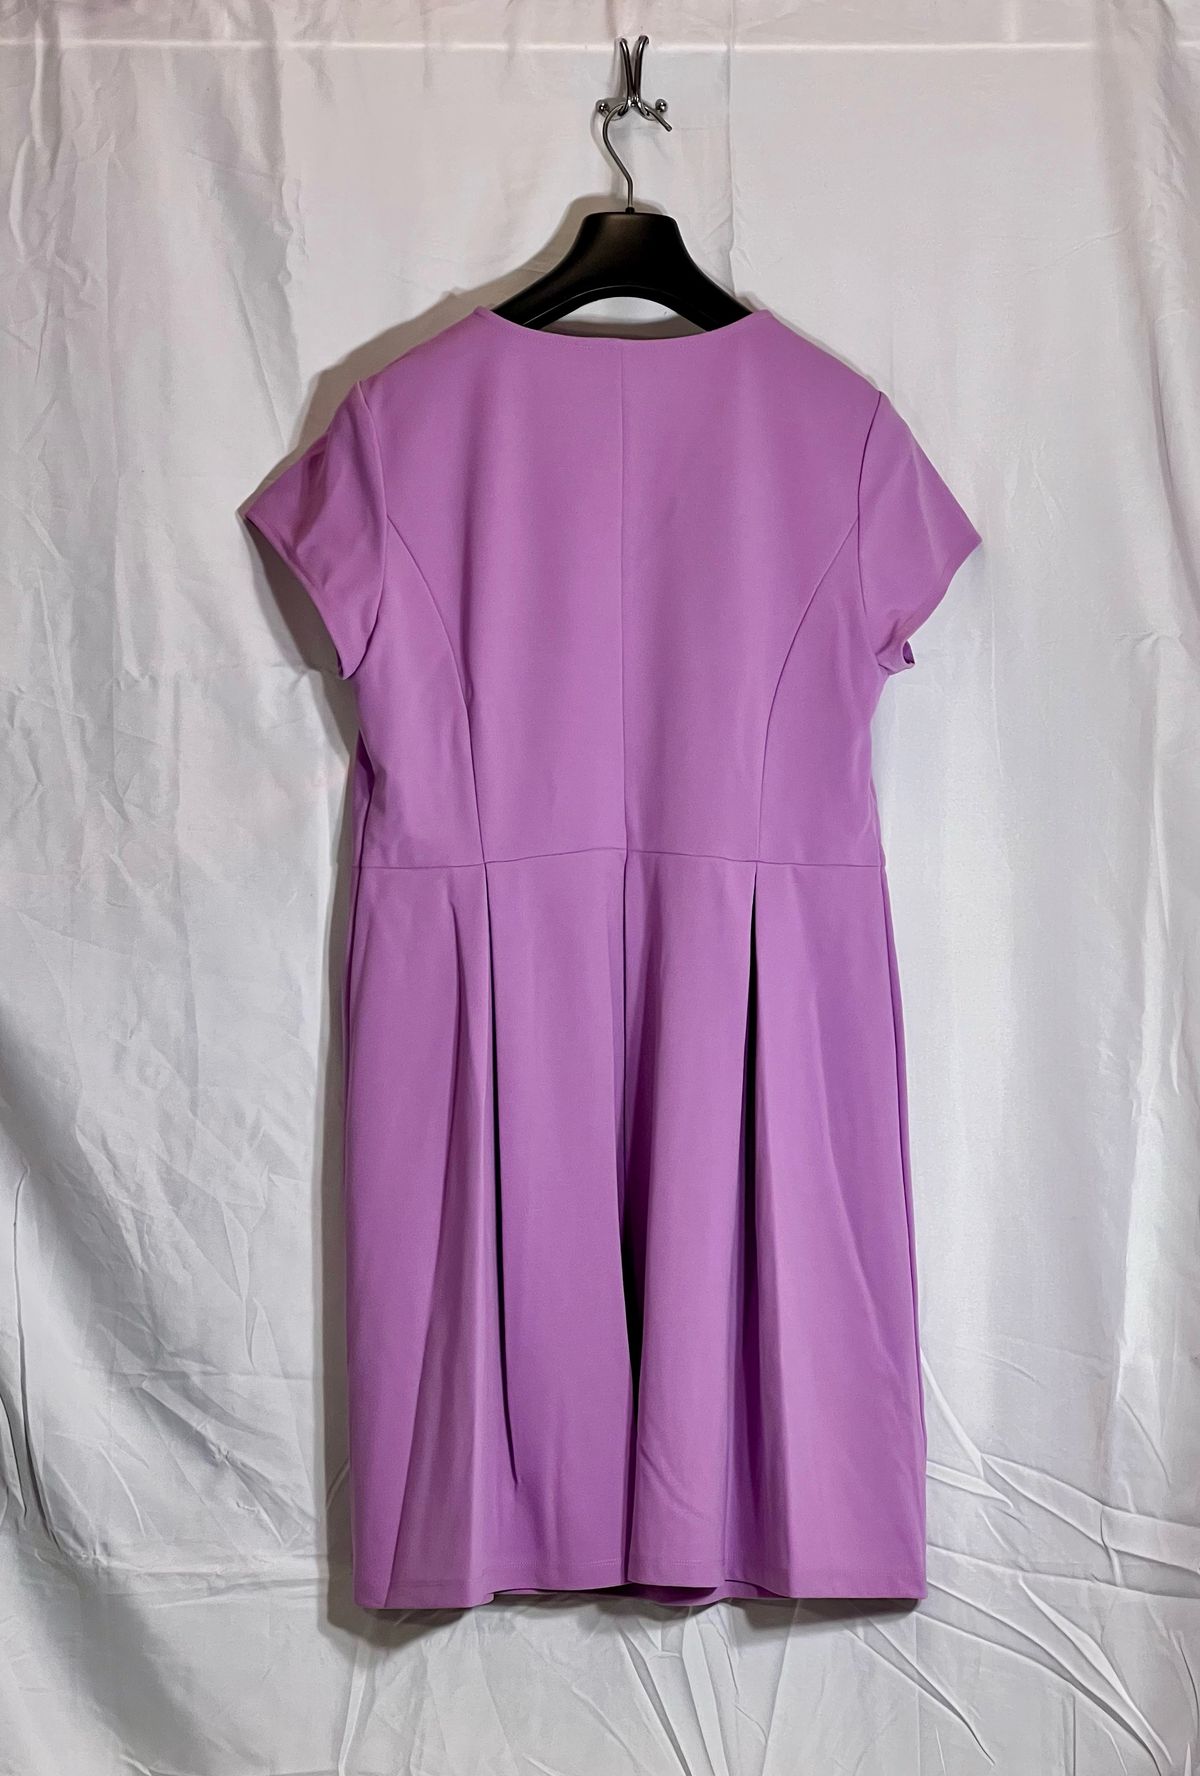 Plus Size 16 Wedding Guest Cap Sleeve Pink Cocktail Dress on Queenly